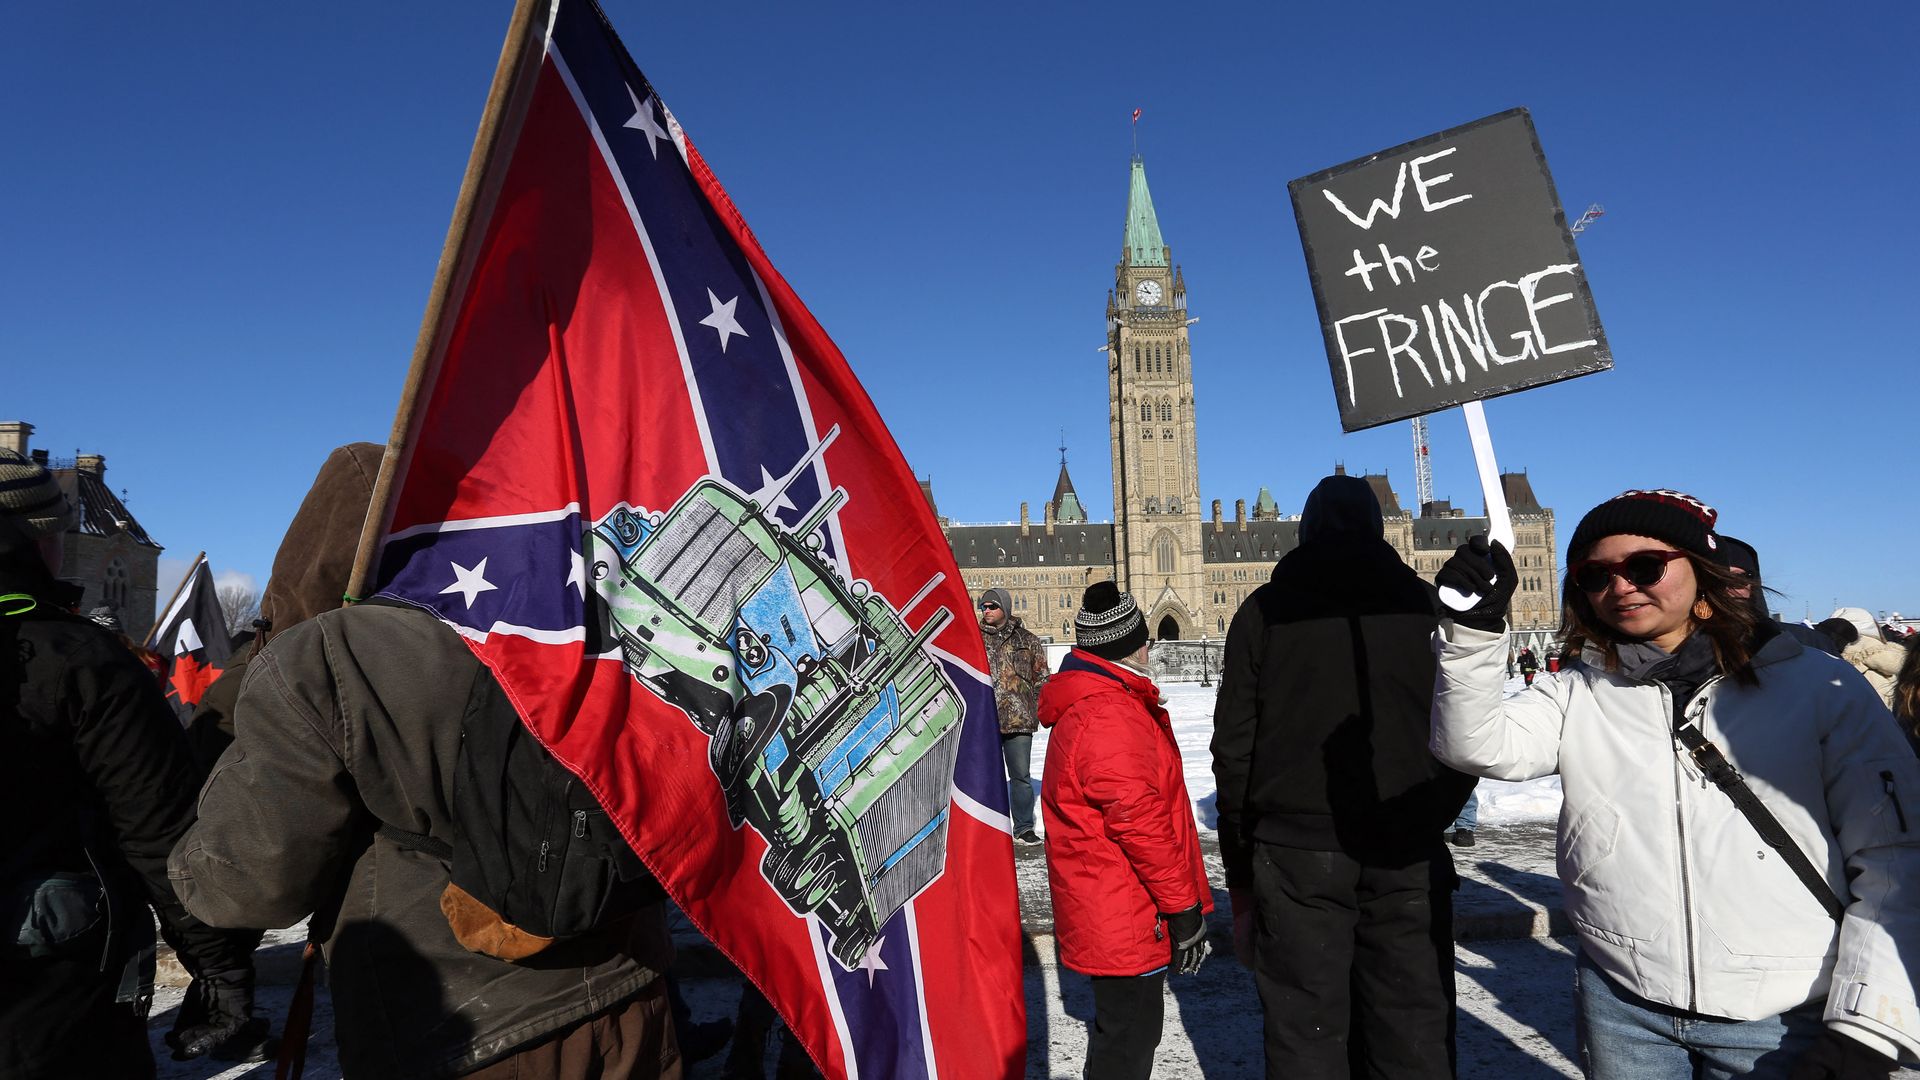 A supporter carries a US Confederate flag during the Freedom Convoy protesting Covid-19 vaccine mandates and restrictions in front of Parliament on January 29, 2022 in Ottawa, Canada.